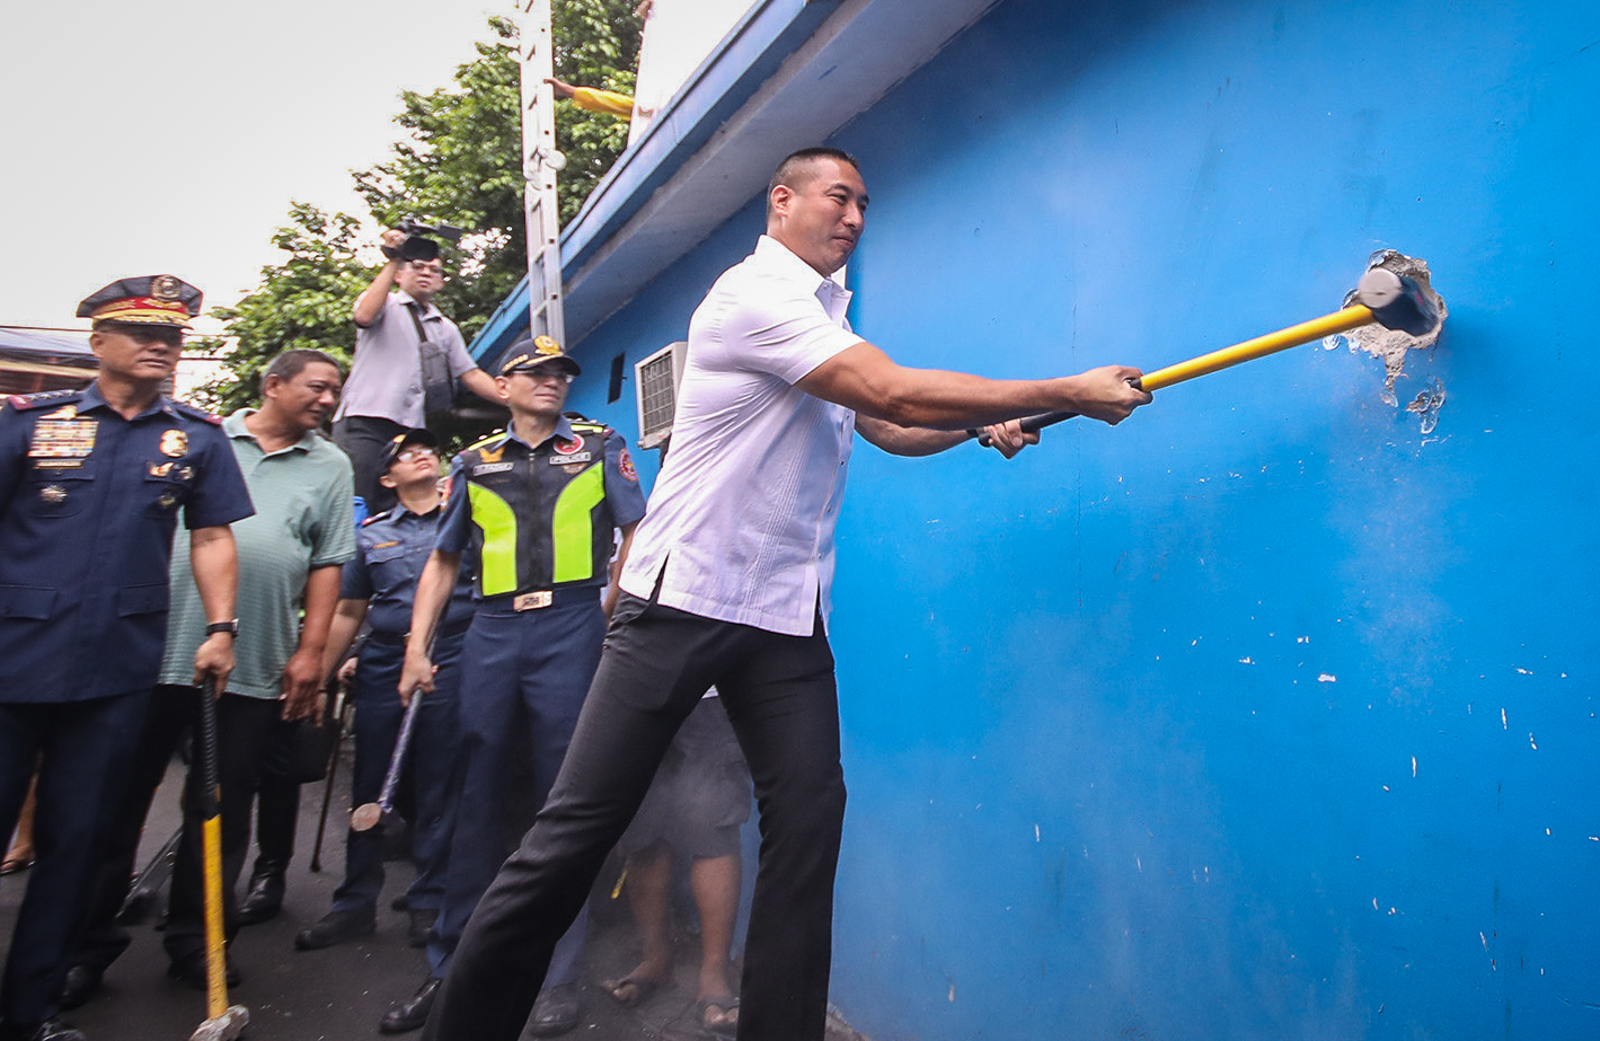 CLEARING. To lead the example PNP Chief Police General Oscar Albayalde, NCRPO Chief Guillermo Elleazar along with San Juan Mayor Francis Zamora on July 30, 2019, demolish Community Precinct structures at West Crame in San Juan City per president order to reclaim sidewalks for pedestrians. Photo by Darren Langit/Rappler  